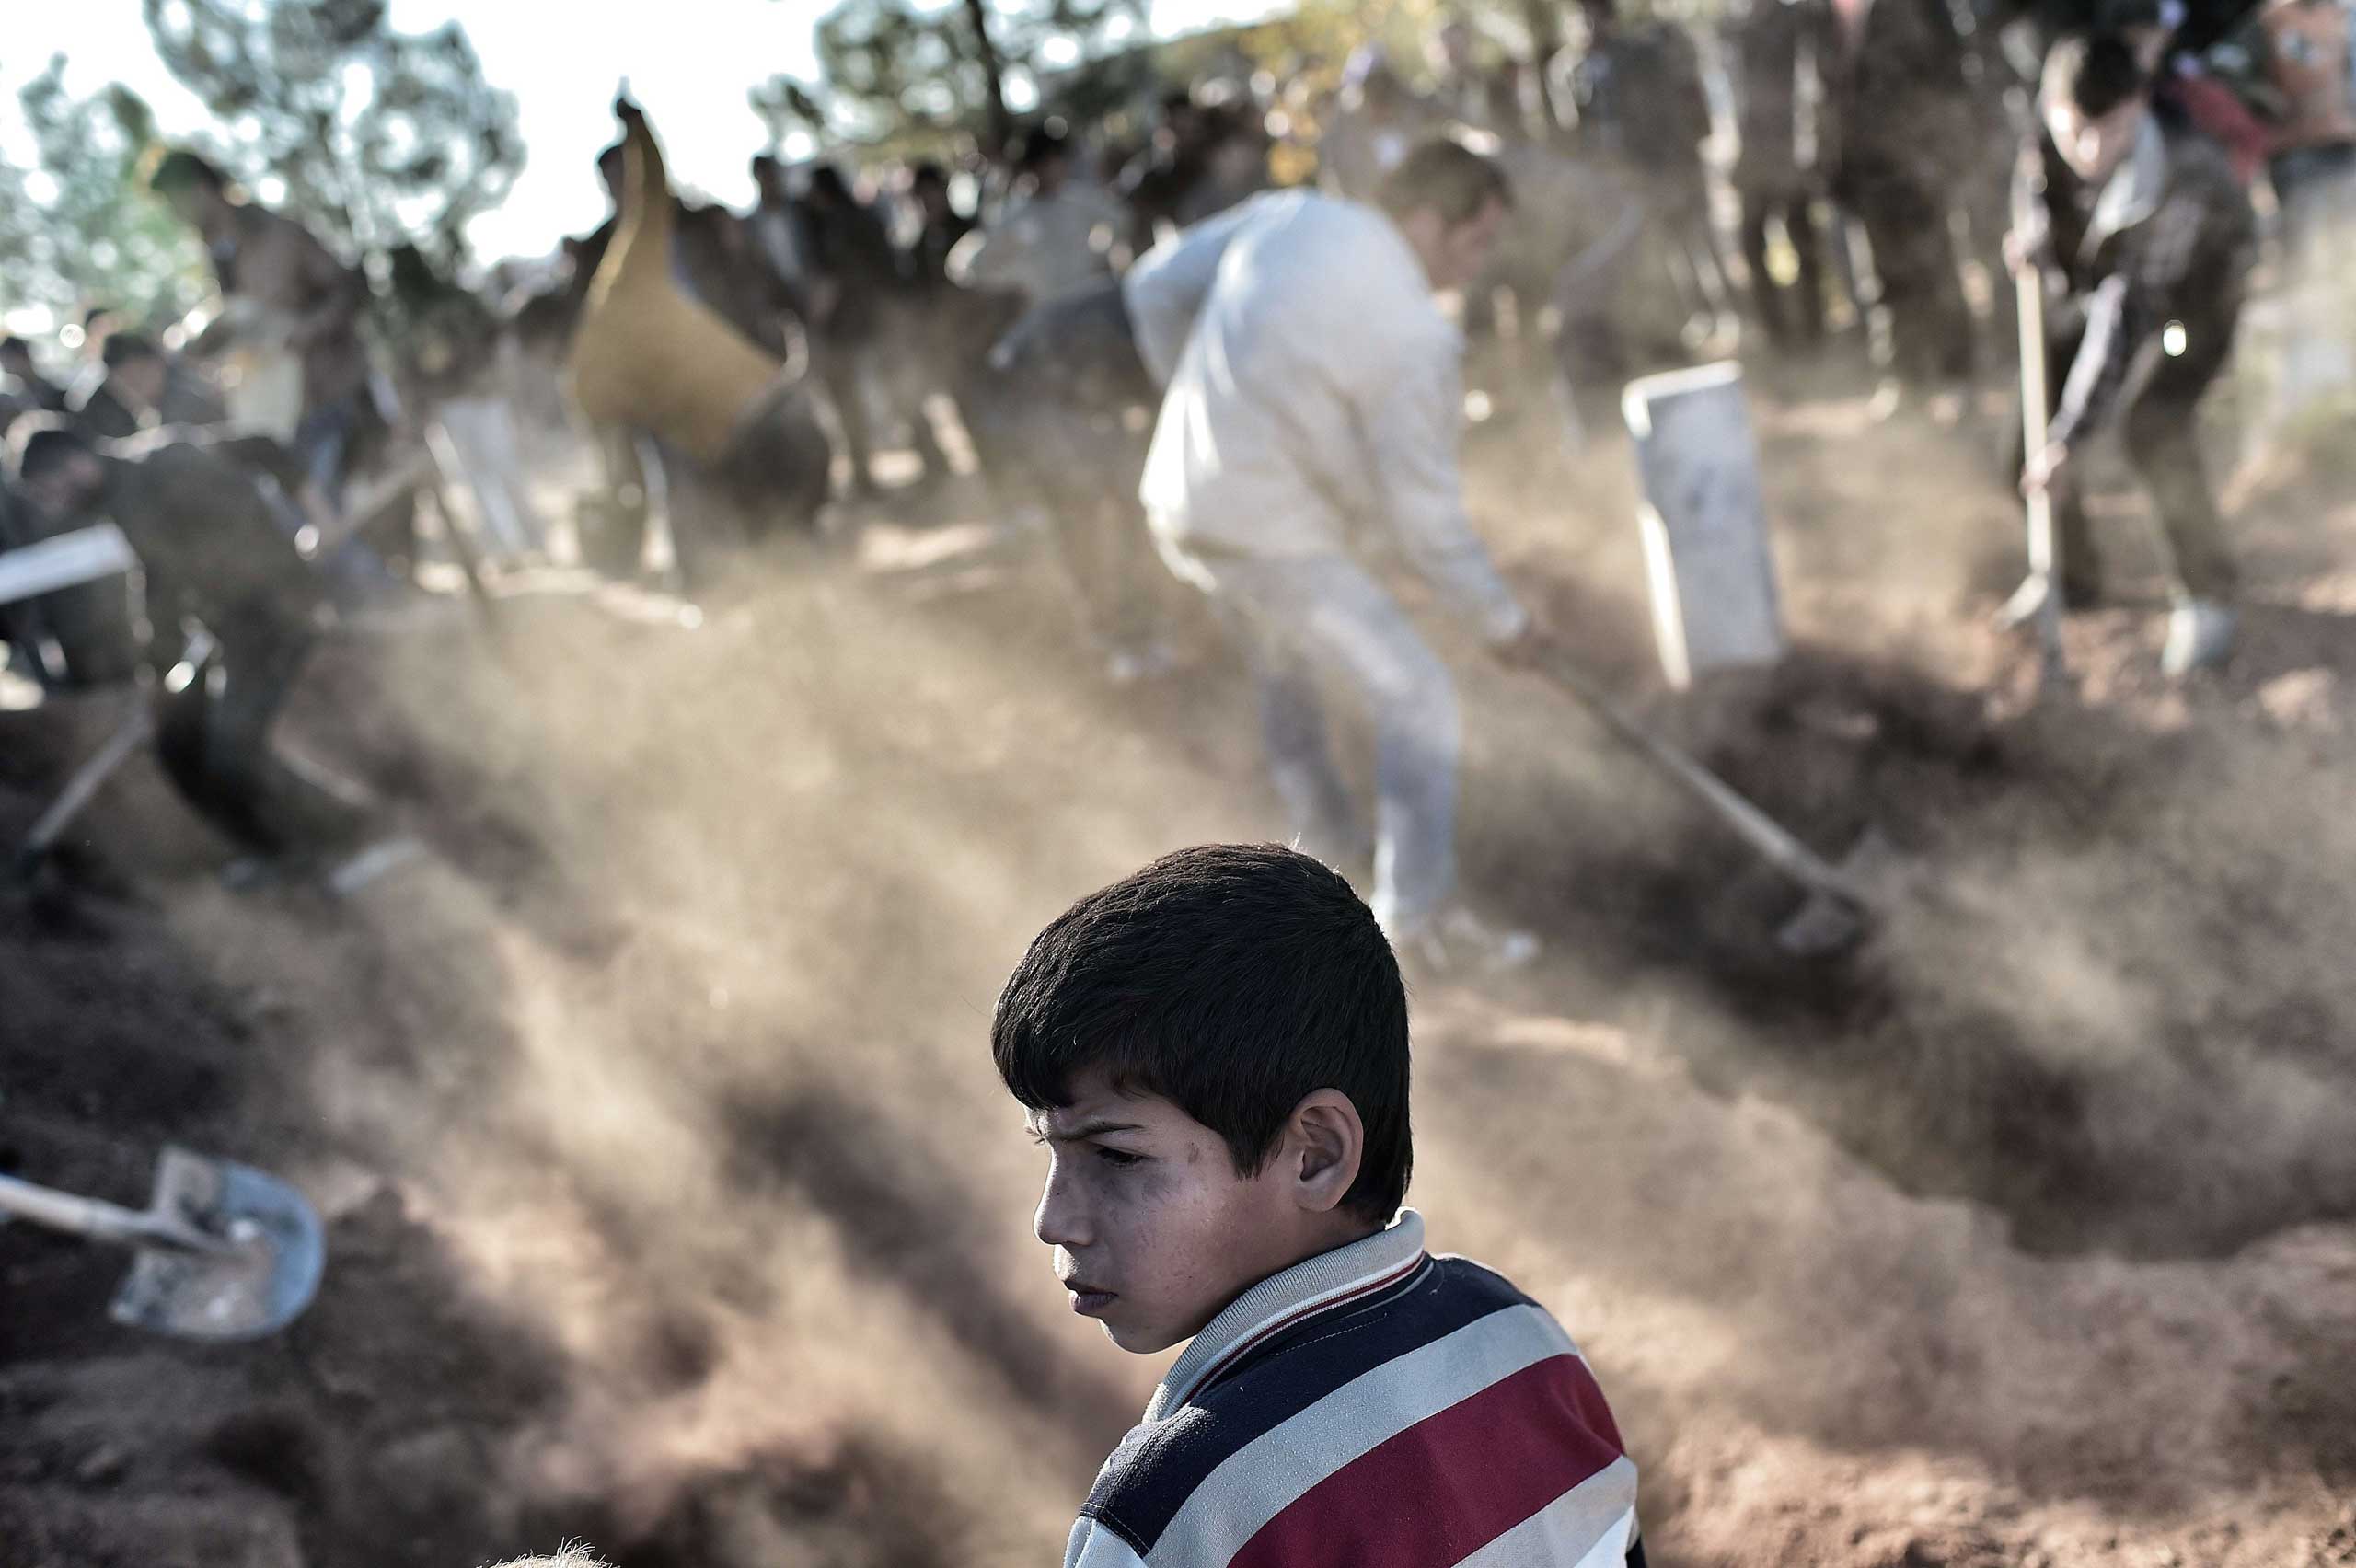 Nov. 7, 2014. A young boy looks on as he attends the funeral of a Kurdish Women's Protection Unit (YPJ) fighter who died during fighting in the besieged Syrian border town of Kobane, in the town of Suruc, Sanliurfa province in Turkey.